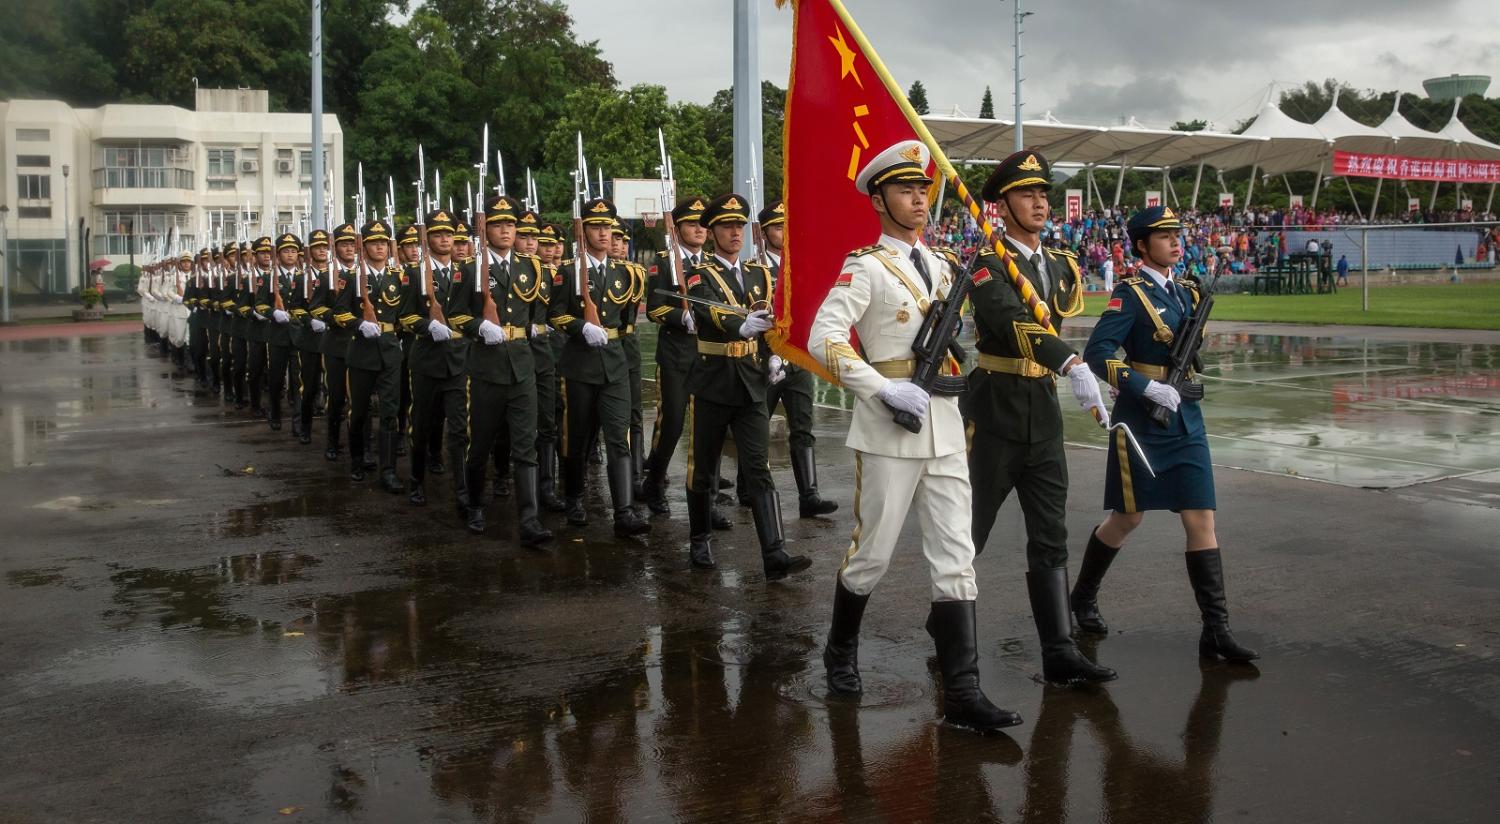 Members of the People's Liberation Army at an open day at the Ngong Suen Chau Barracks in Hong Kong, China, on 8 July. (Photo: Billy Kwok/Getty)